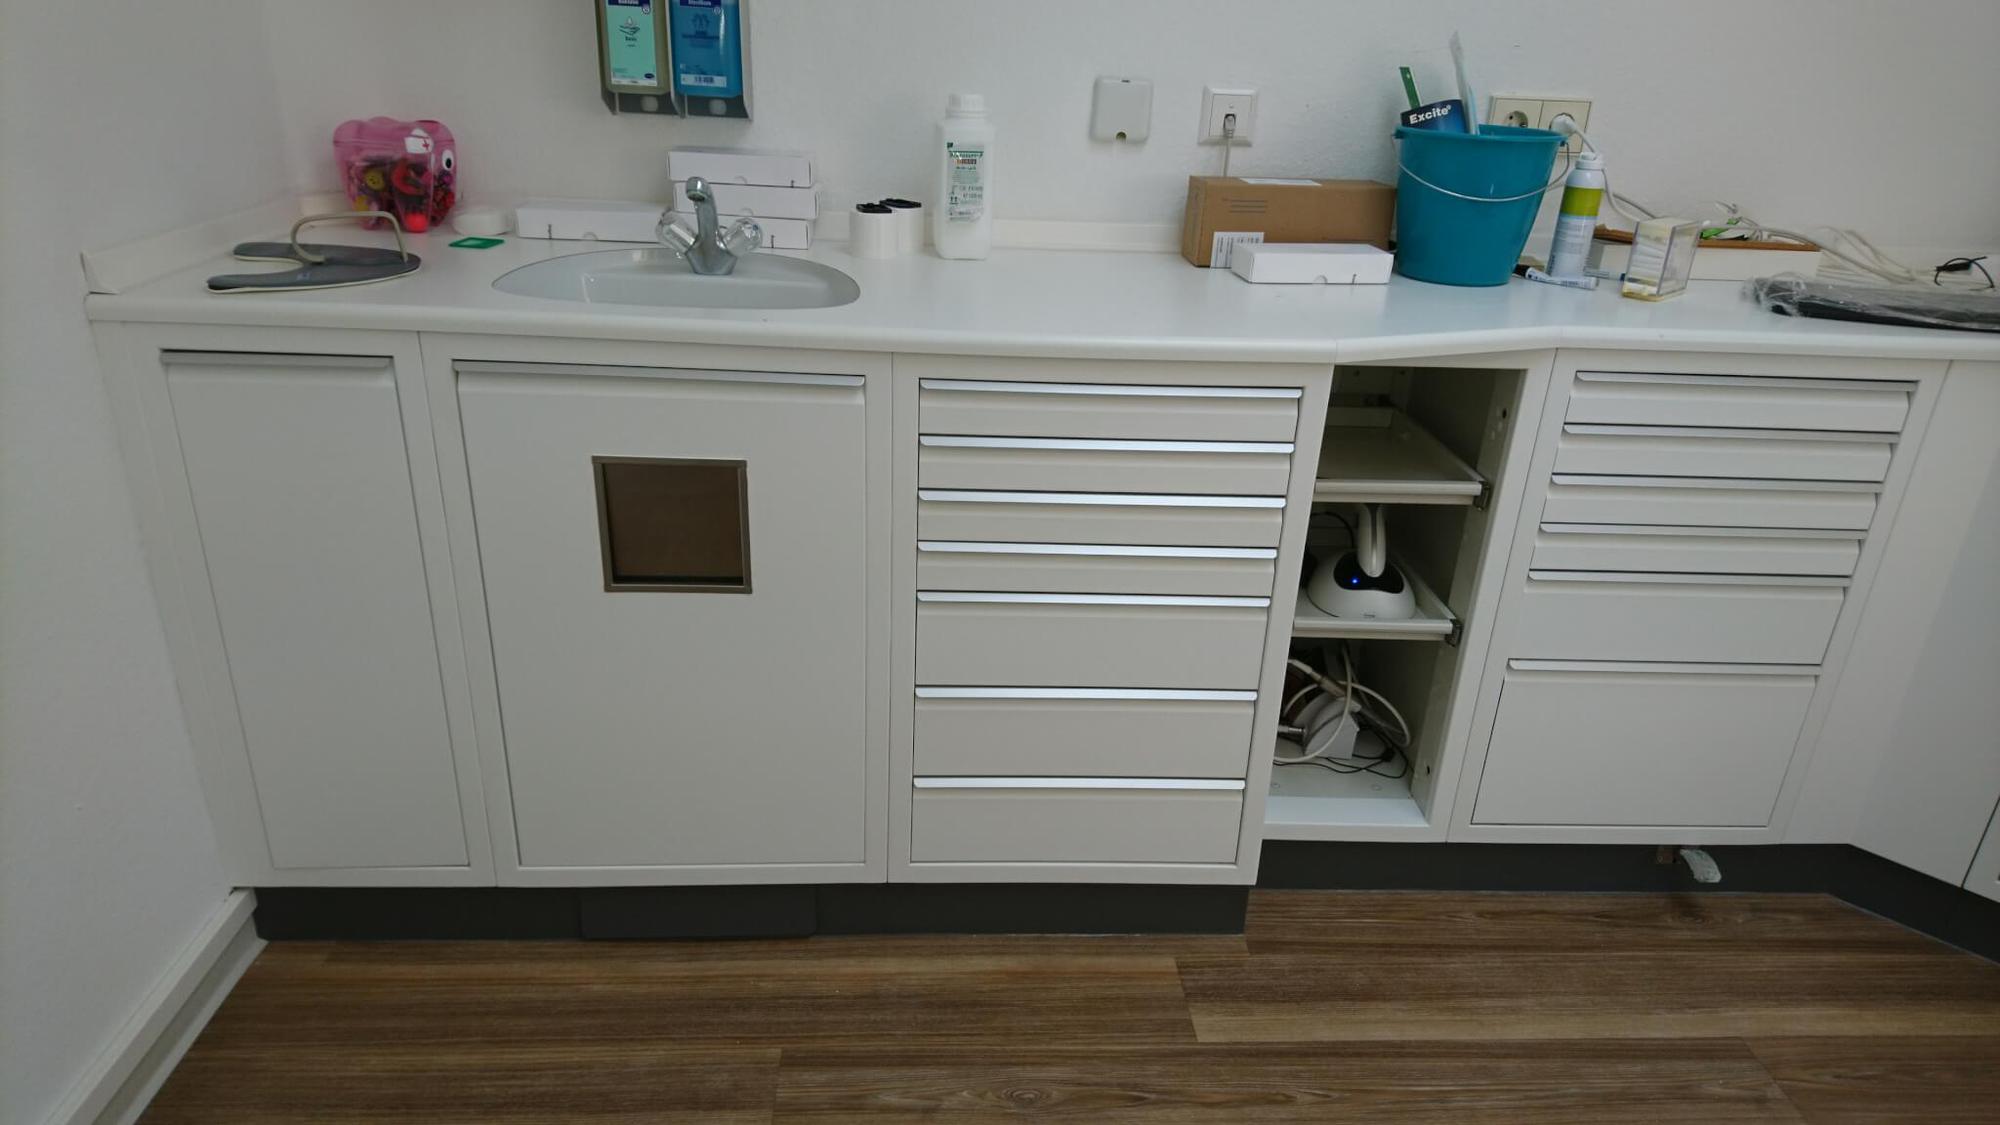 Renovating white metal medical practice furnishings, quickly and affordably 03